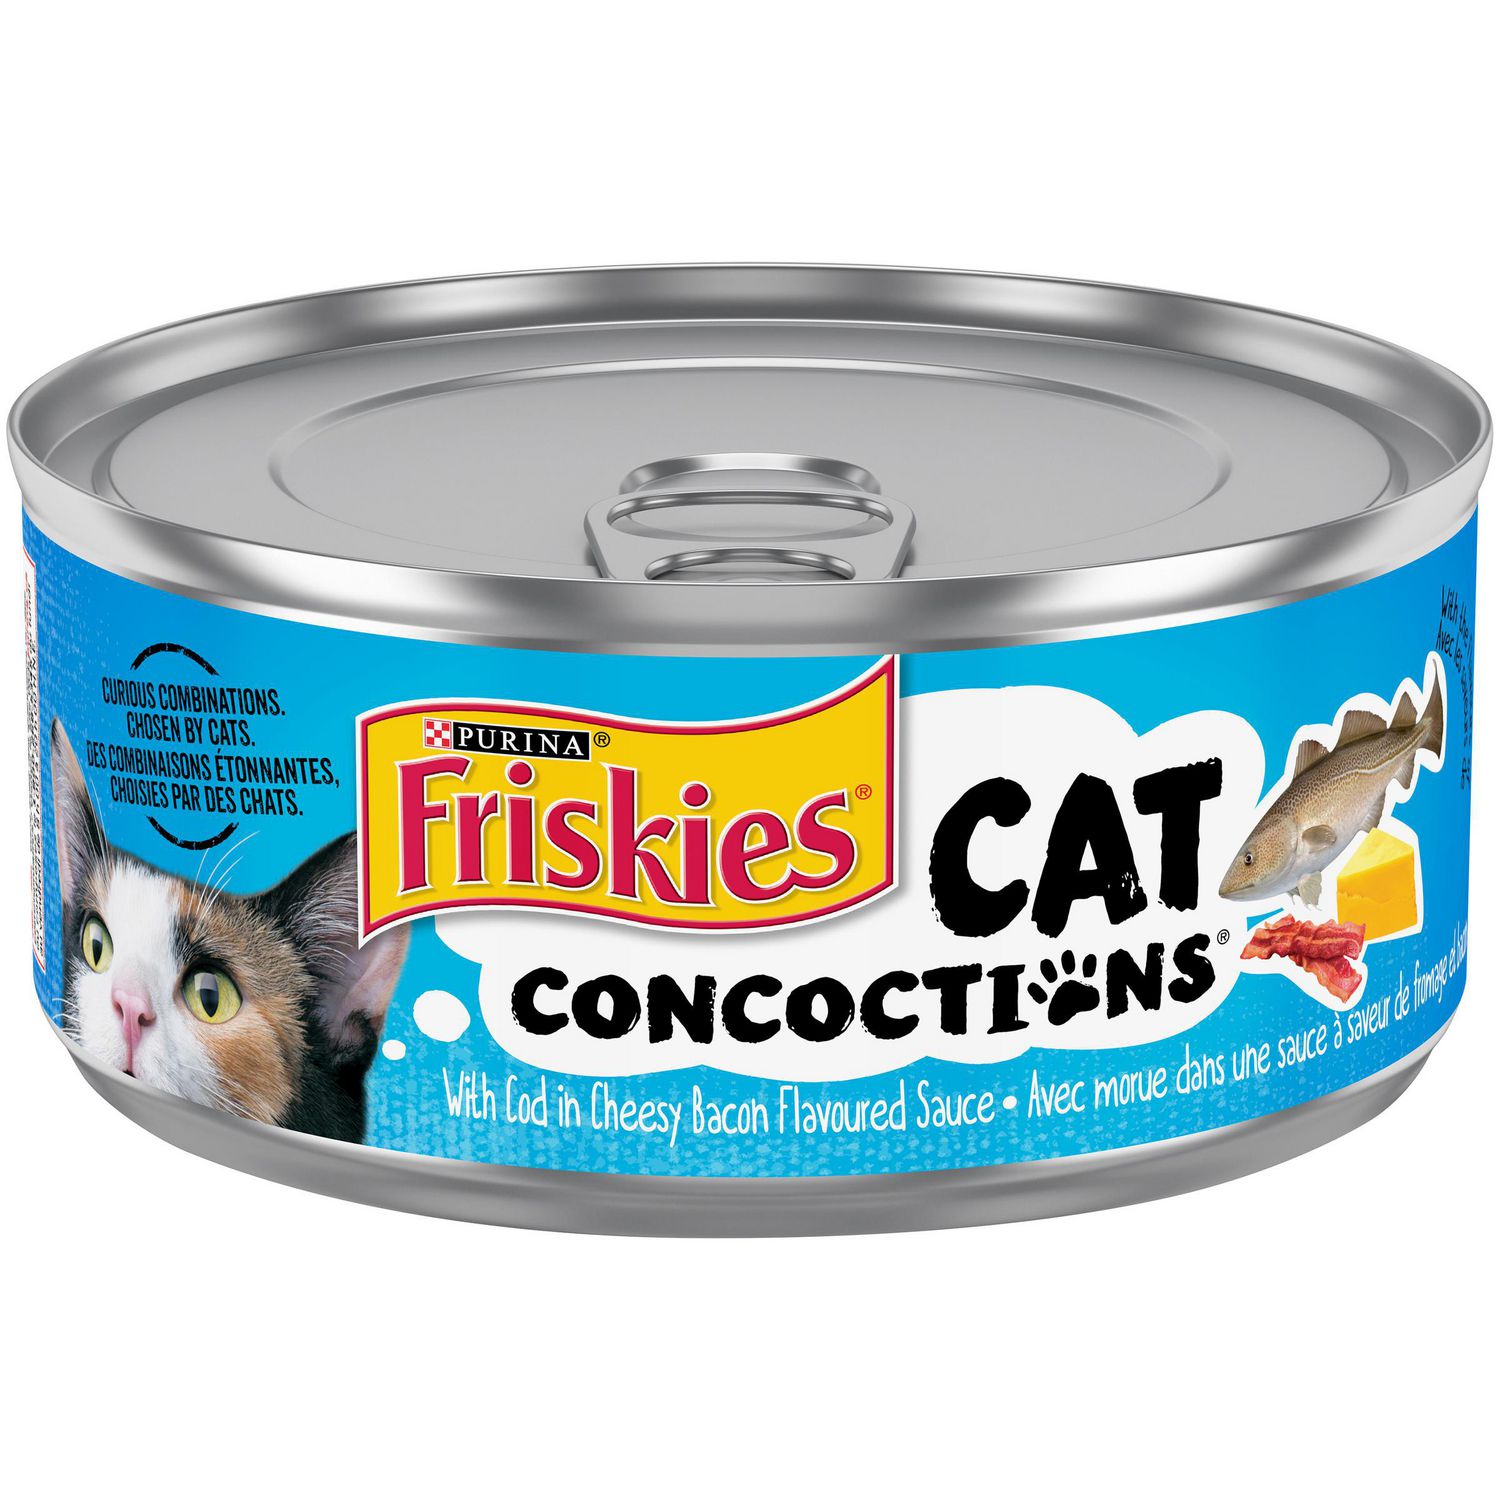 Friskies Concoctions Wet Cat Food; Cod in Cheesy Bacon Flavoured Sauce